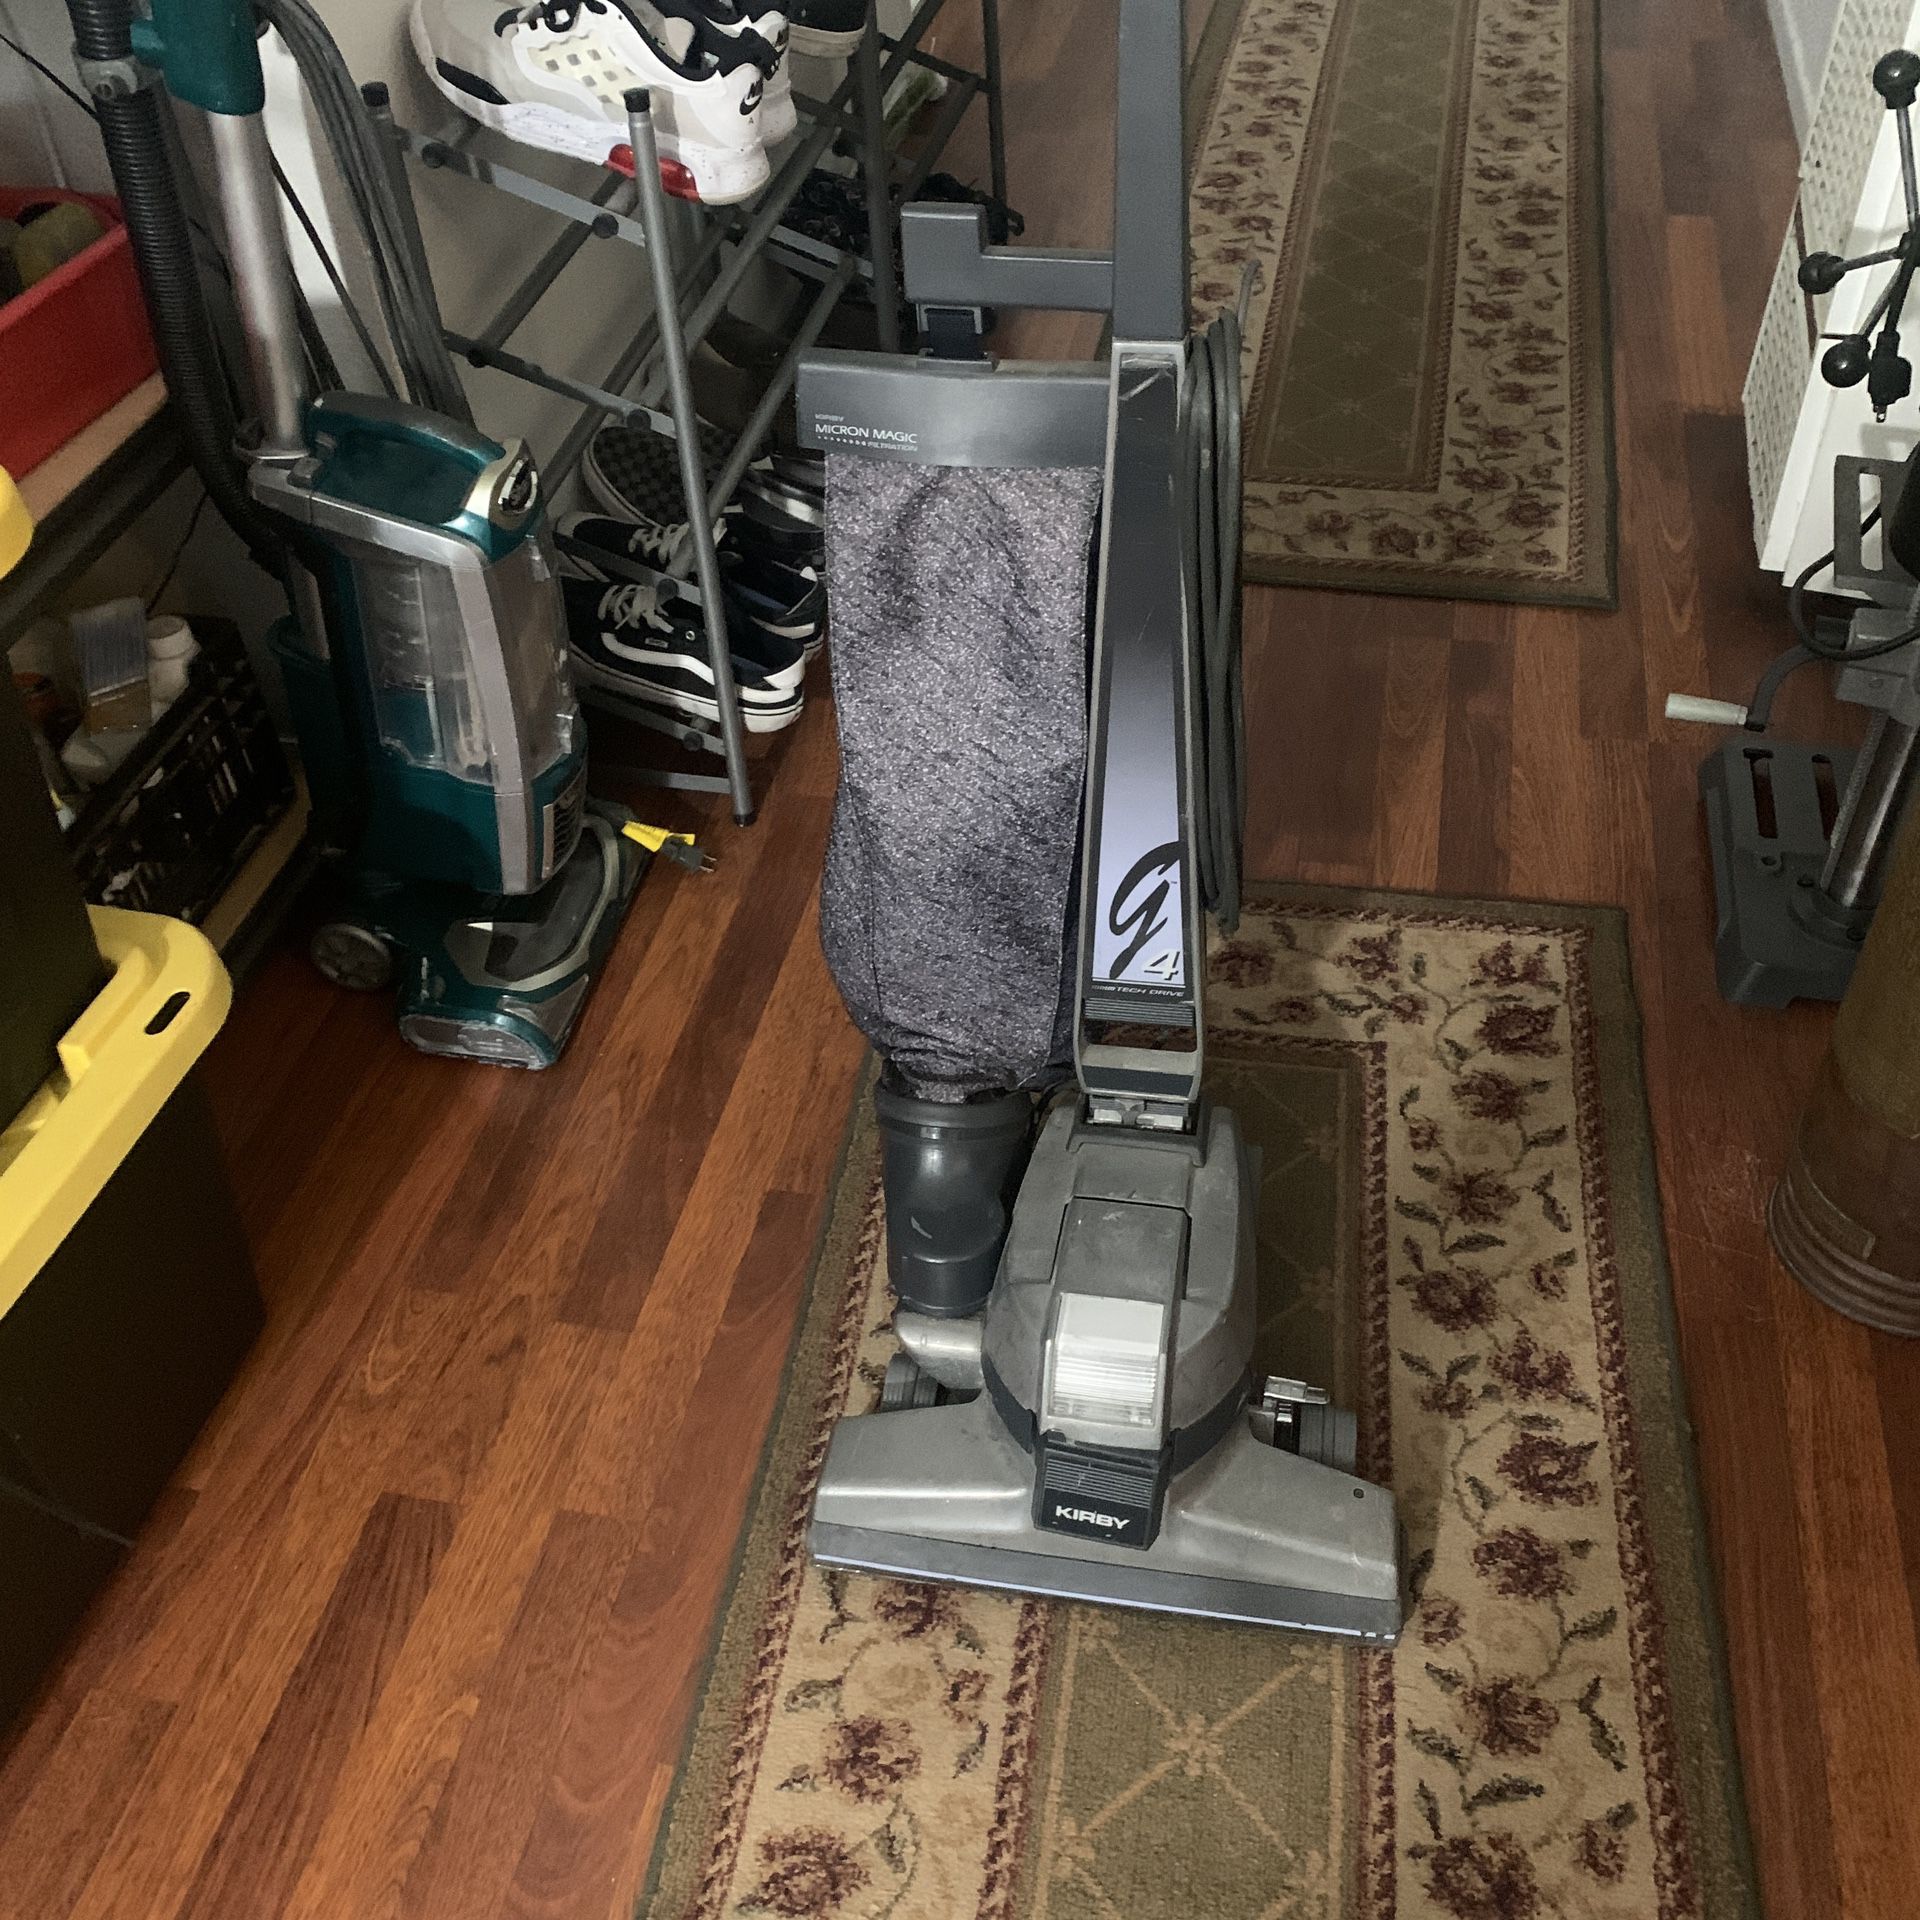 Kirby G4 Vacuum - Excellent Condition